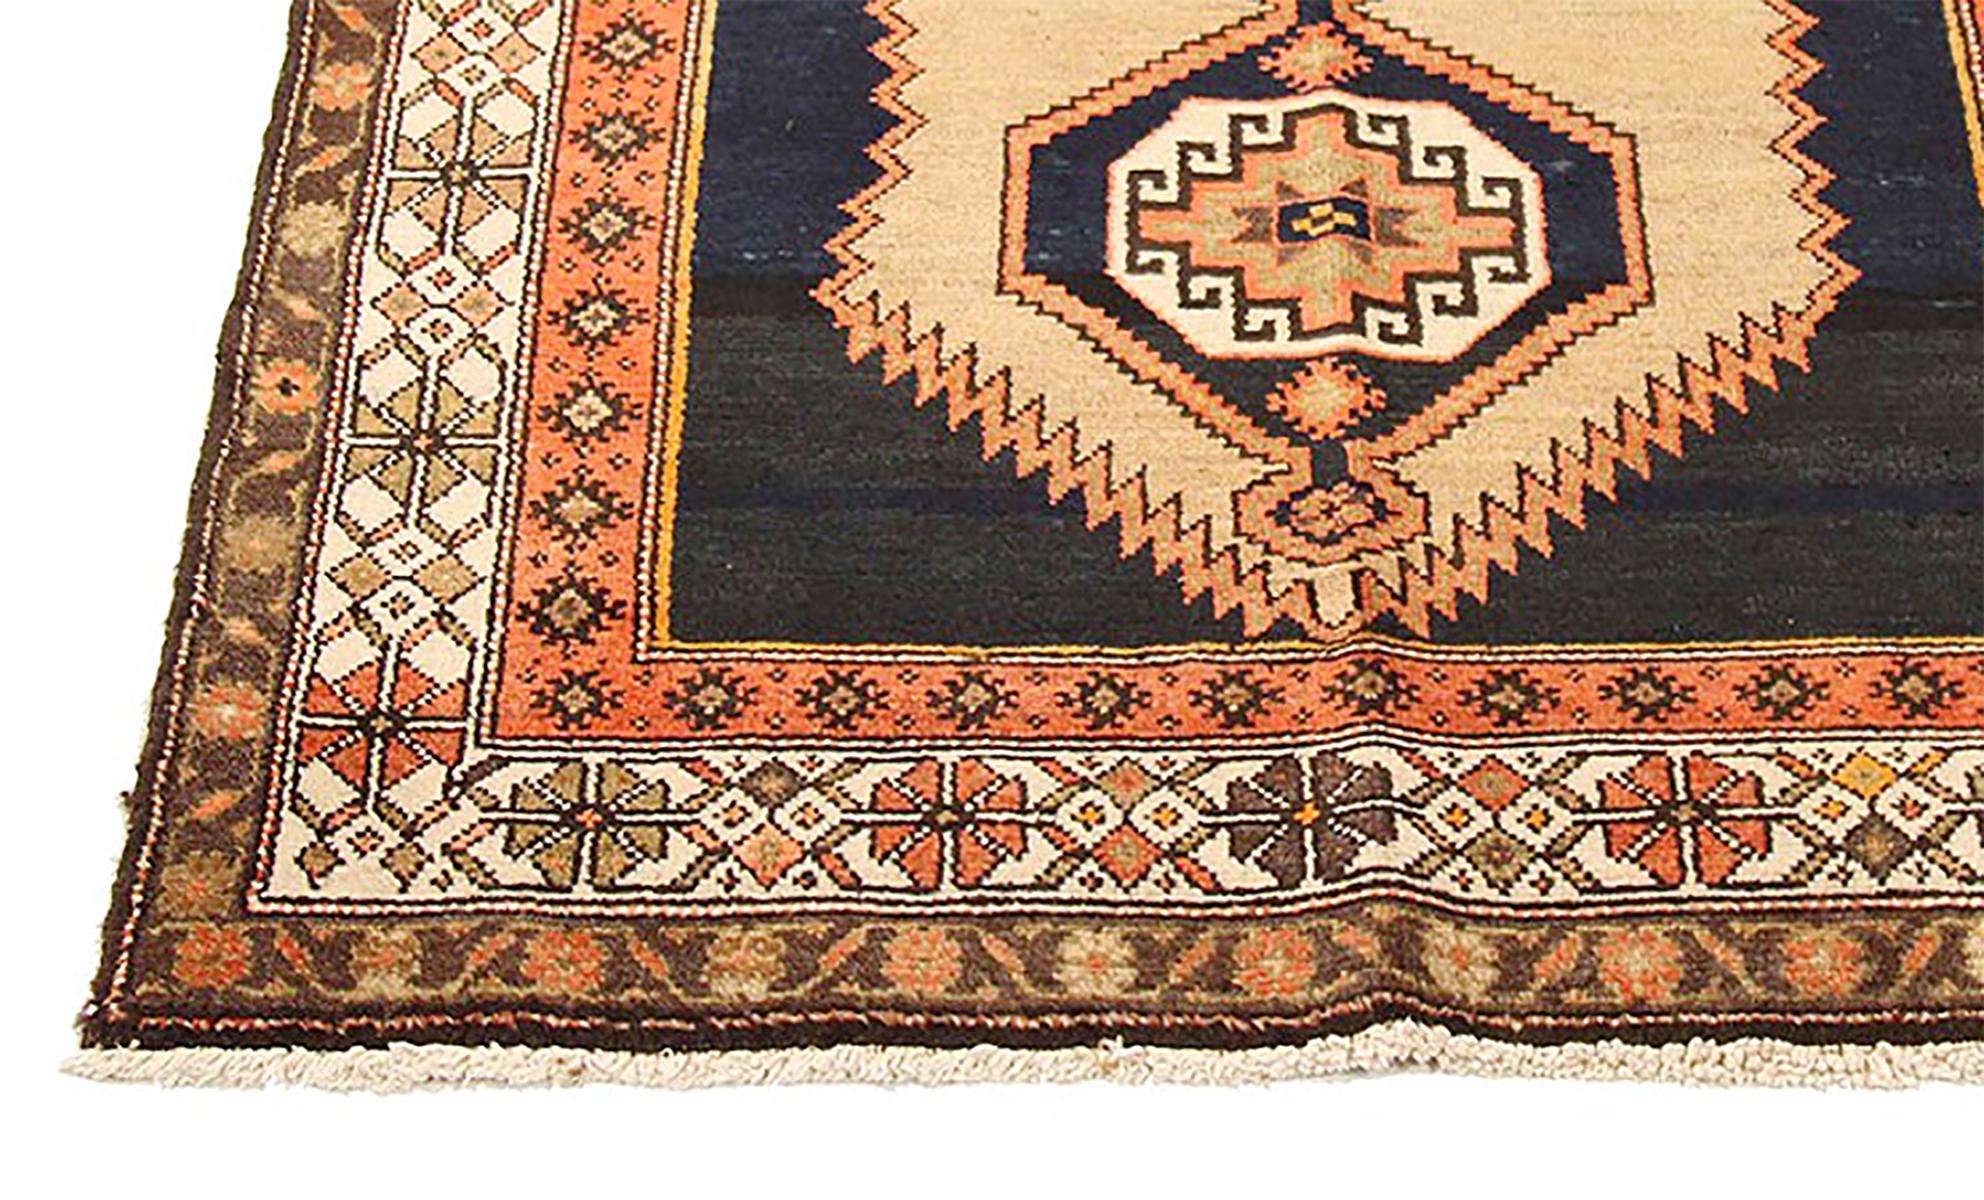 Hand-Woven Antique Persian Malayer Rug with Black and Beige Geometric Medallions For Sale